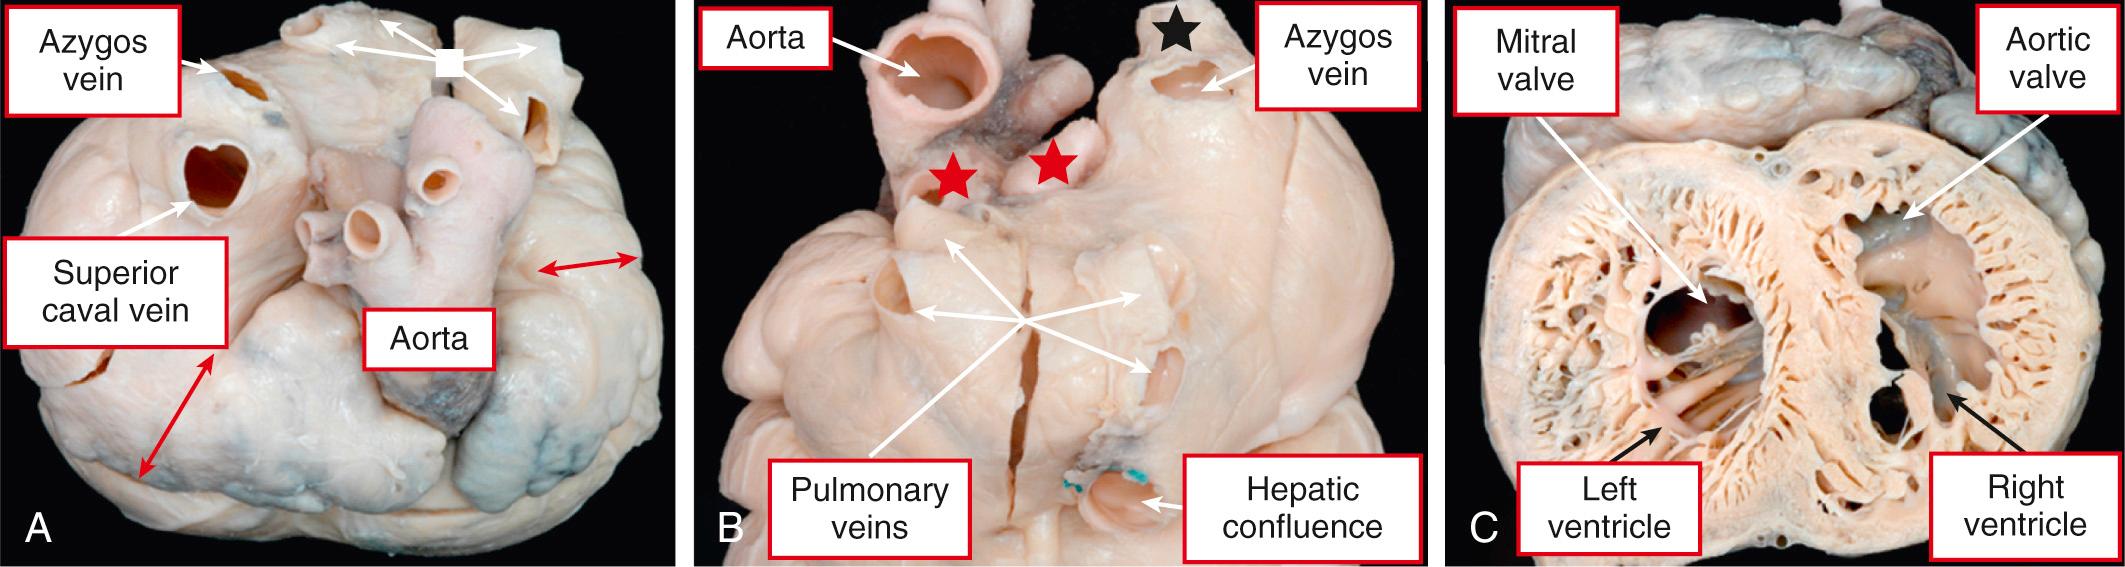 Fig. 26.8, Heart with isomerism of the left atrial appendages demonstrating quasi-usual venous relationships. (A) The base of the heart shows bilateral tubular appendages and their narrow junctions (red arrows) with the atrial vestibule. There is a right-sided superior caval vein with a large azygos vein indicative of azygos continuation of the inferior caval vein. The pulmonary veins drain to the left-sided atrium ( white box and arrows ). (B) The posteroinferior view of the same heart. The superior caval vein is marked with a black star and the right and left pulmonary veins with red stars. (C) Short-axis view of the same heart demonstrating so-called noncompaction of both ventricles and the interventricular septum. There was also transposition.